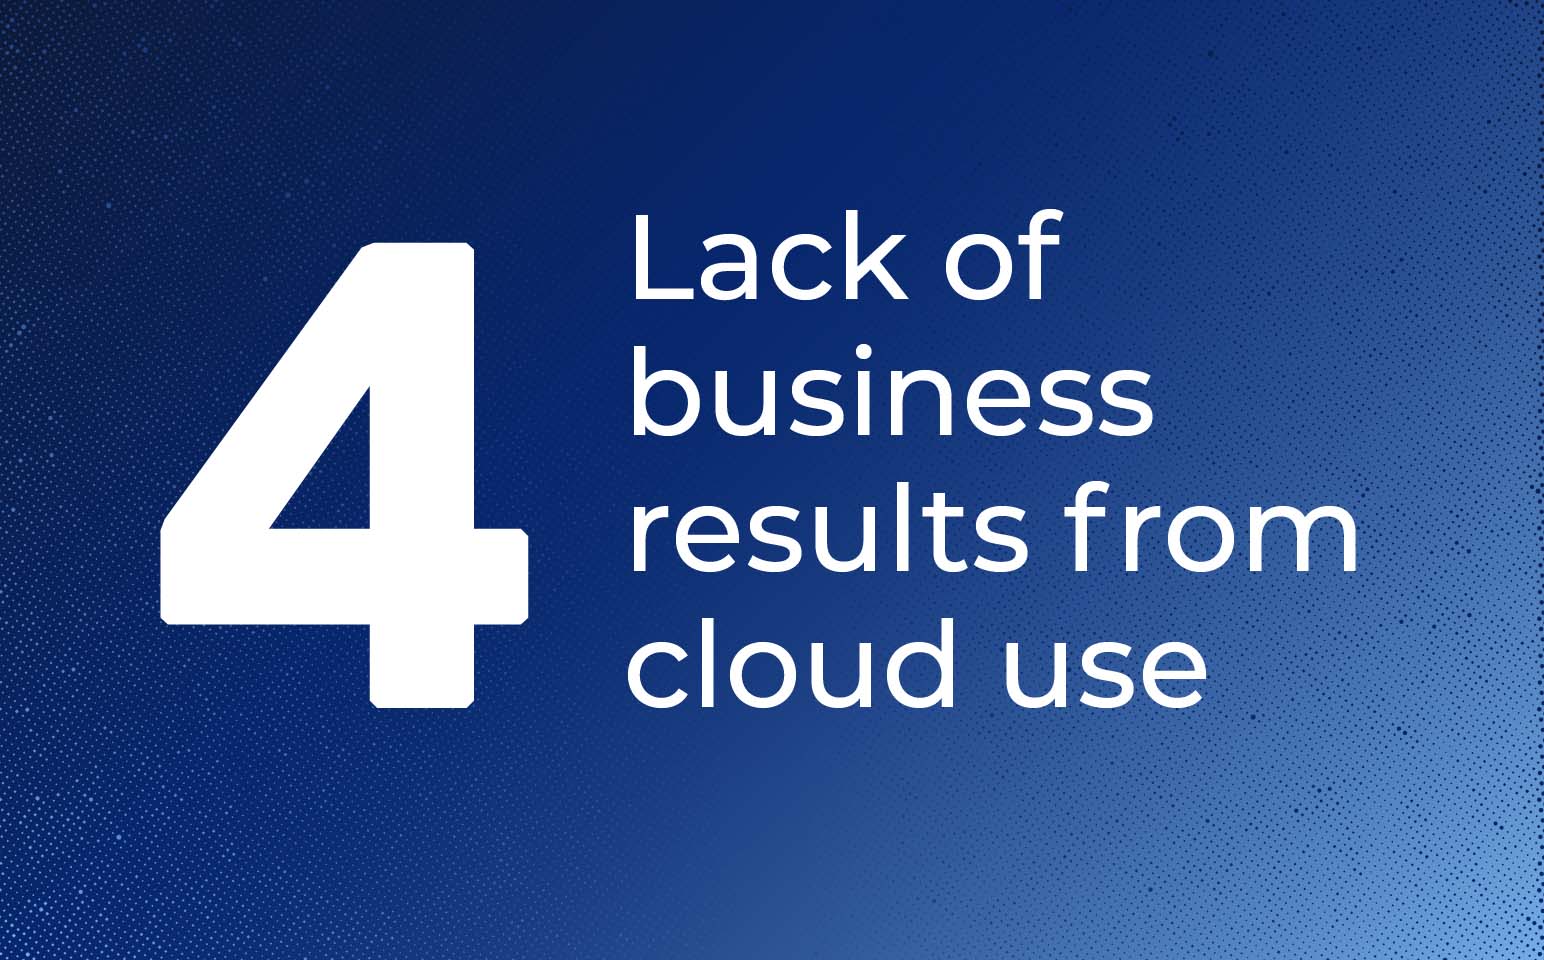 Challenge 4 – Lack of business results from cloud use